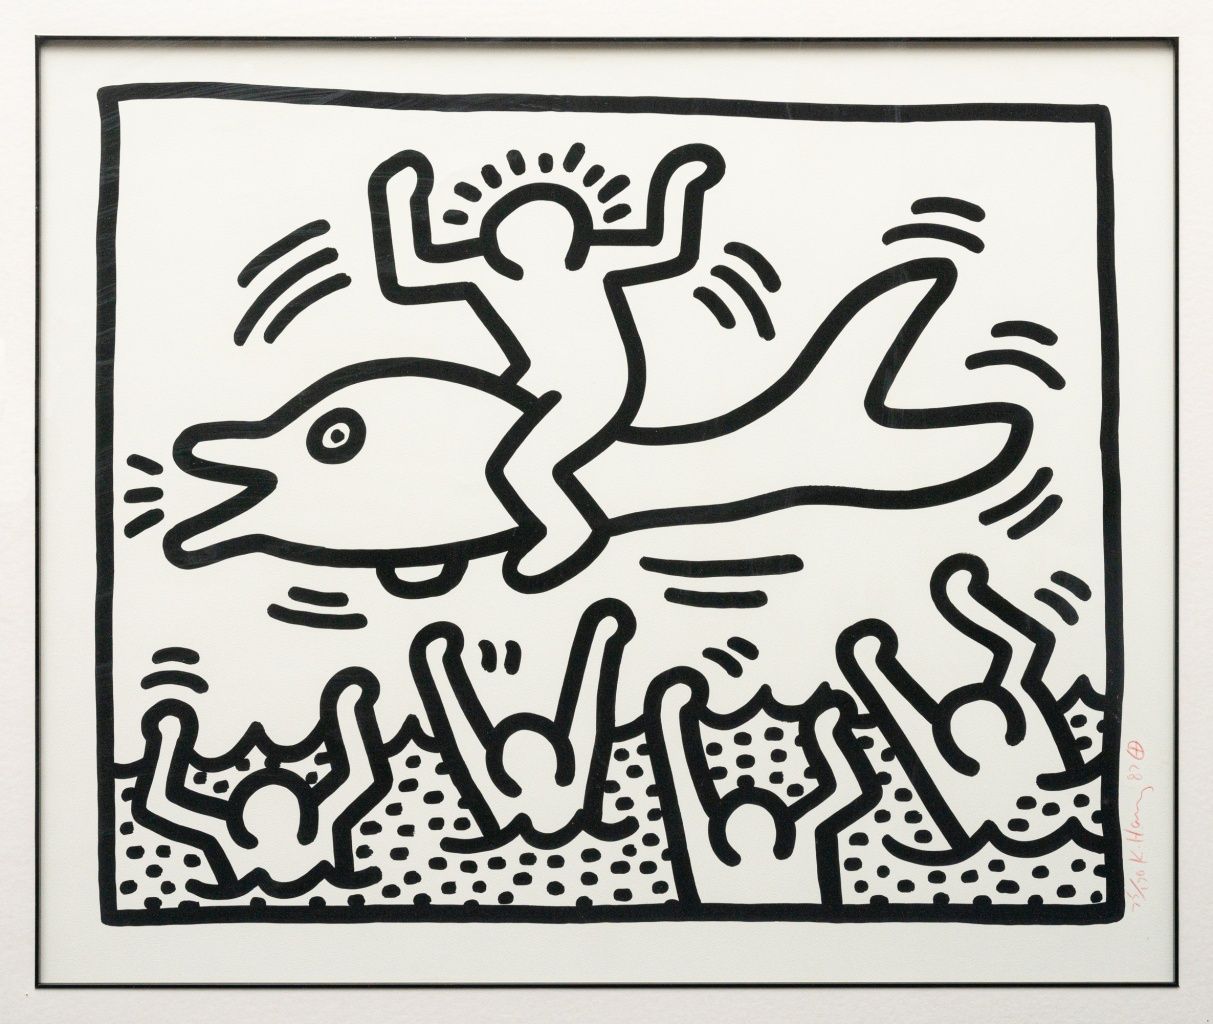 KEITH HARING (1958 - 1990) Keith HARING (1958 - 1990)
Sans titre, 1987 (Man on D&hellip;